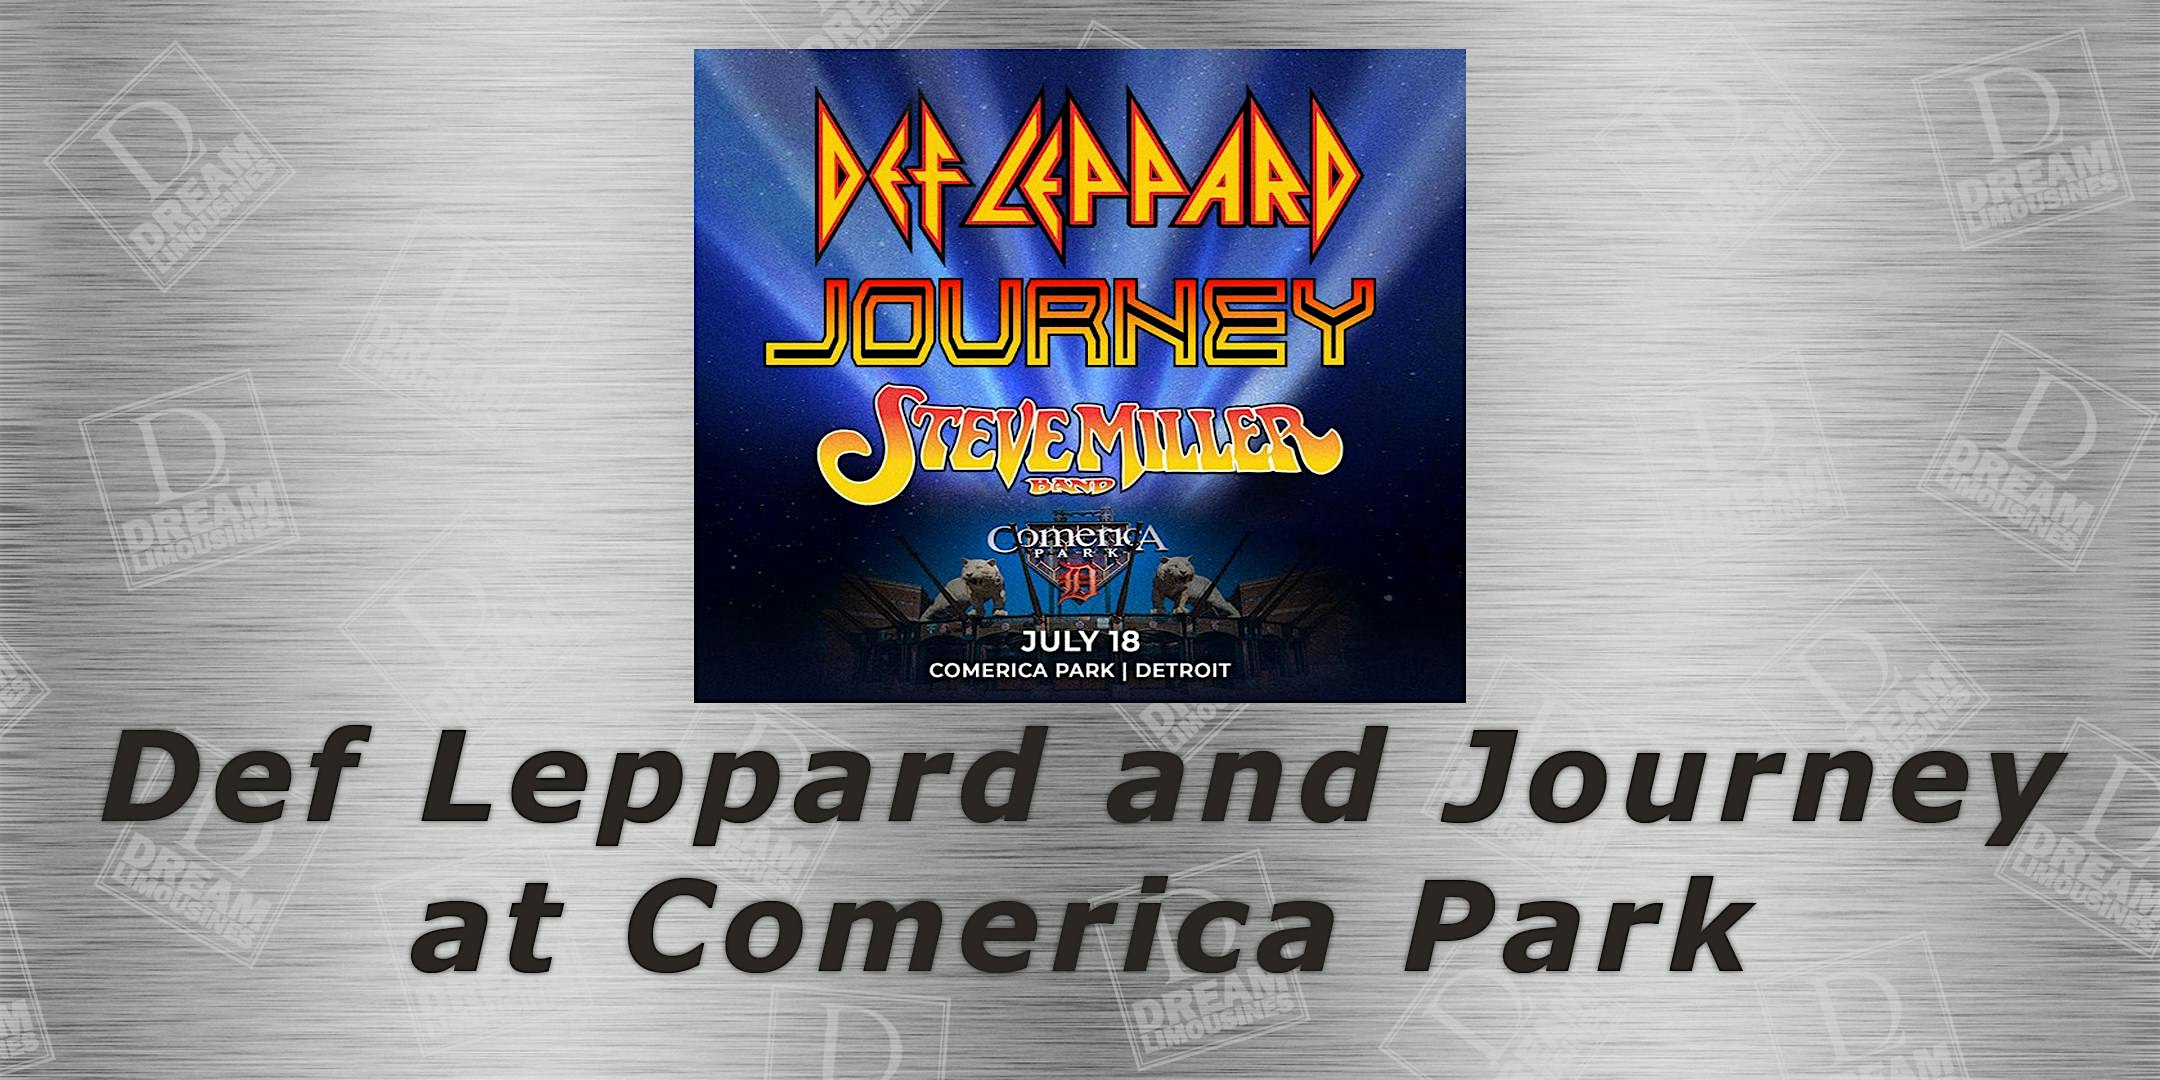 Shuttle Bus to See Def Leppard and Journey at Comerica Park